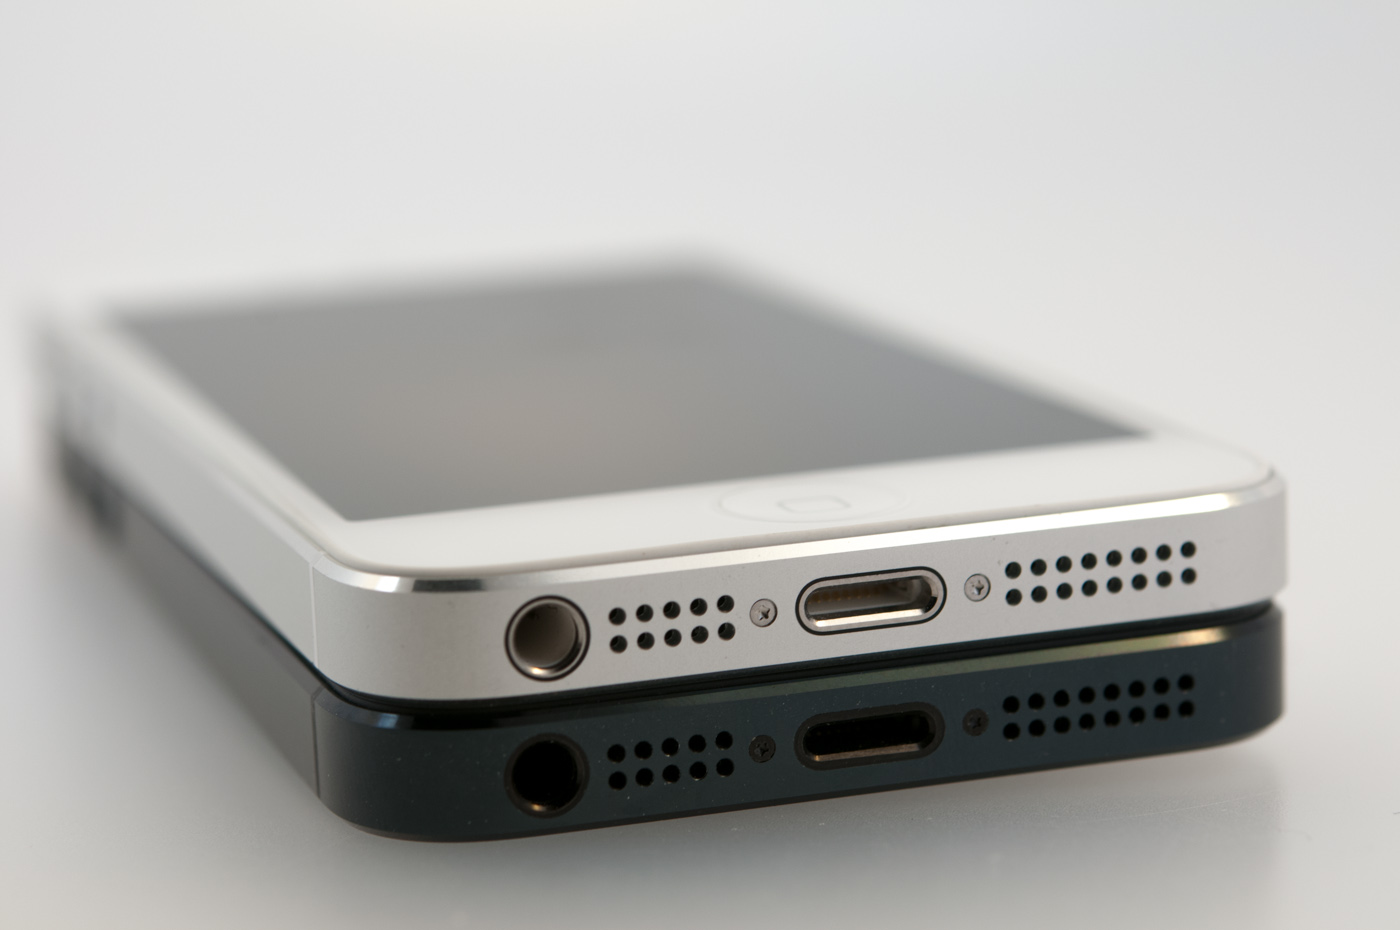 Speakerphone Quality And Noise Suppression The Iphone 5 Review